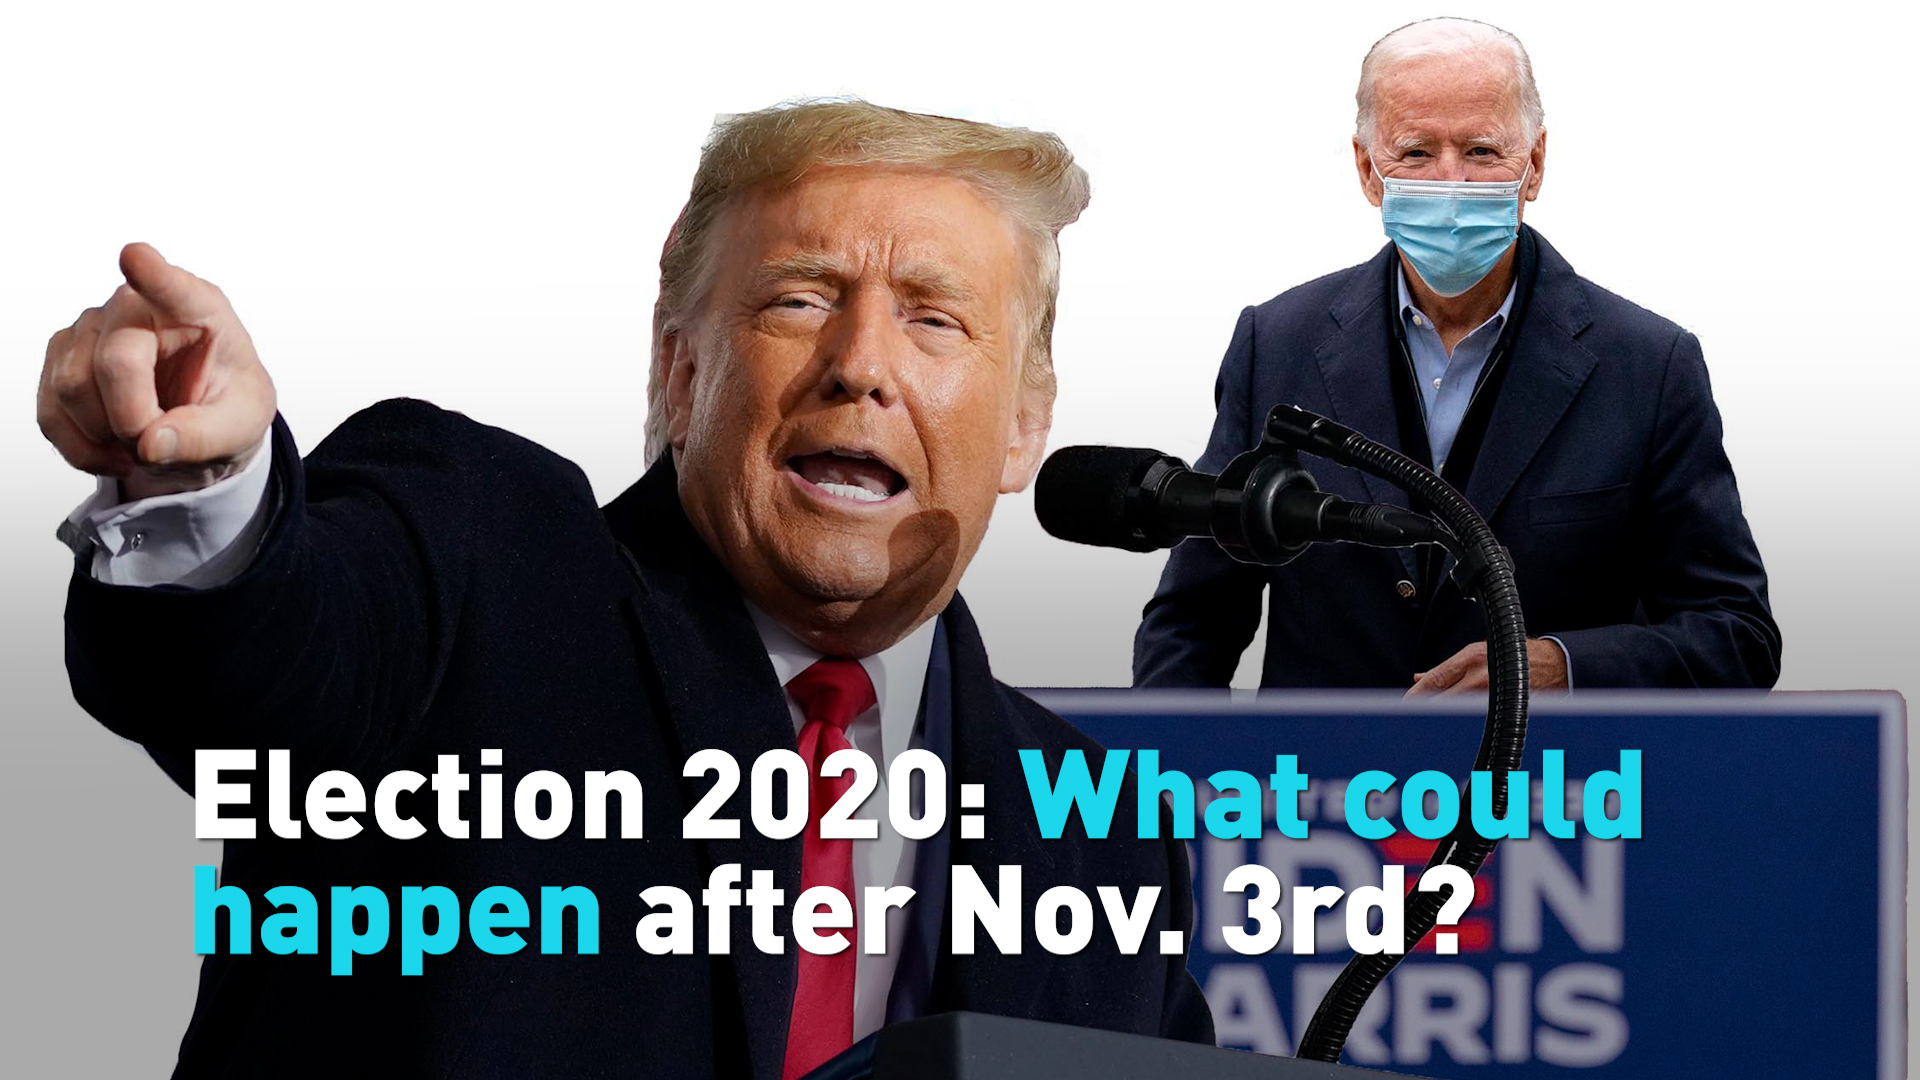 Election 2020: What could happen after Nov. 3rd?